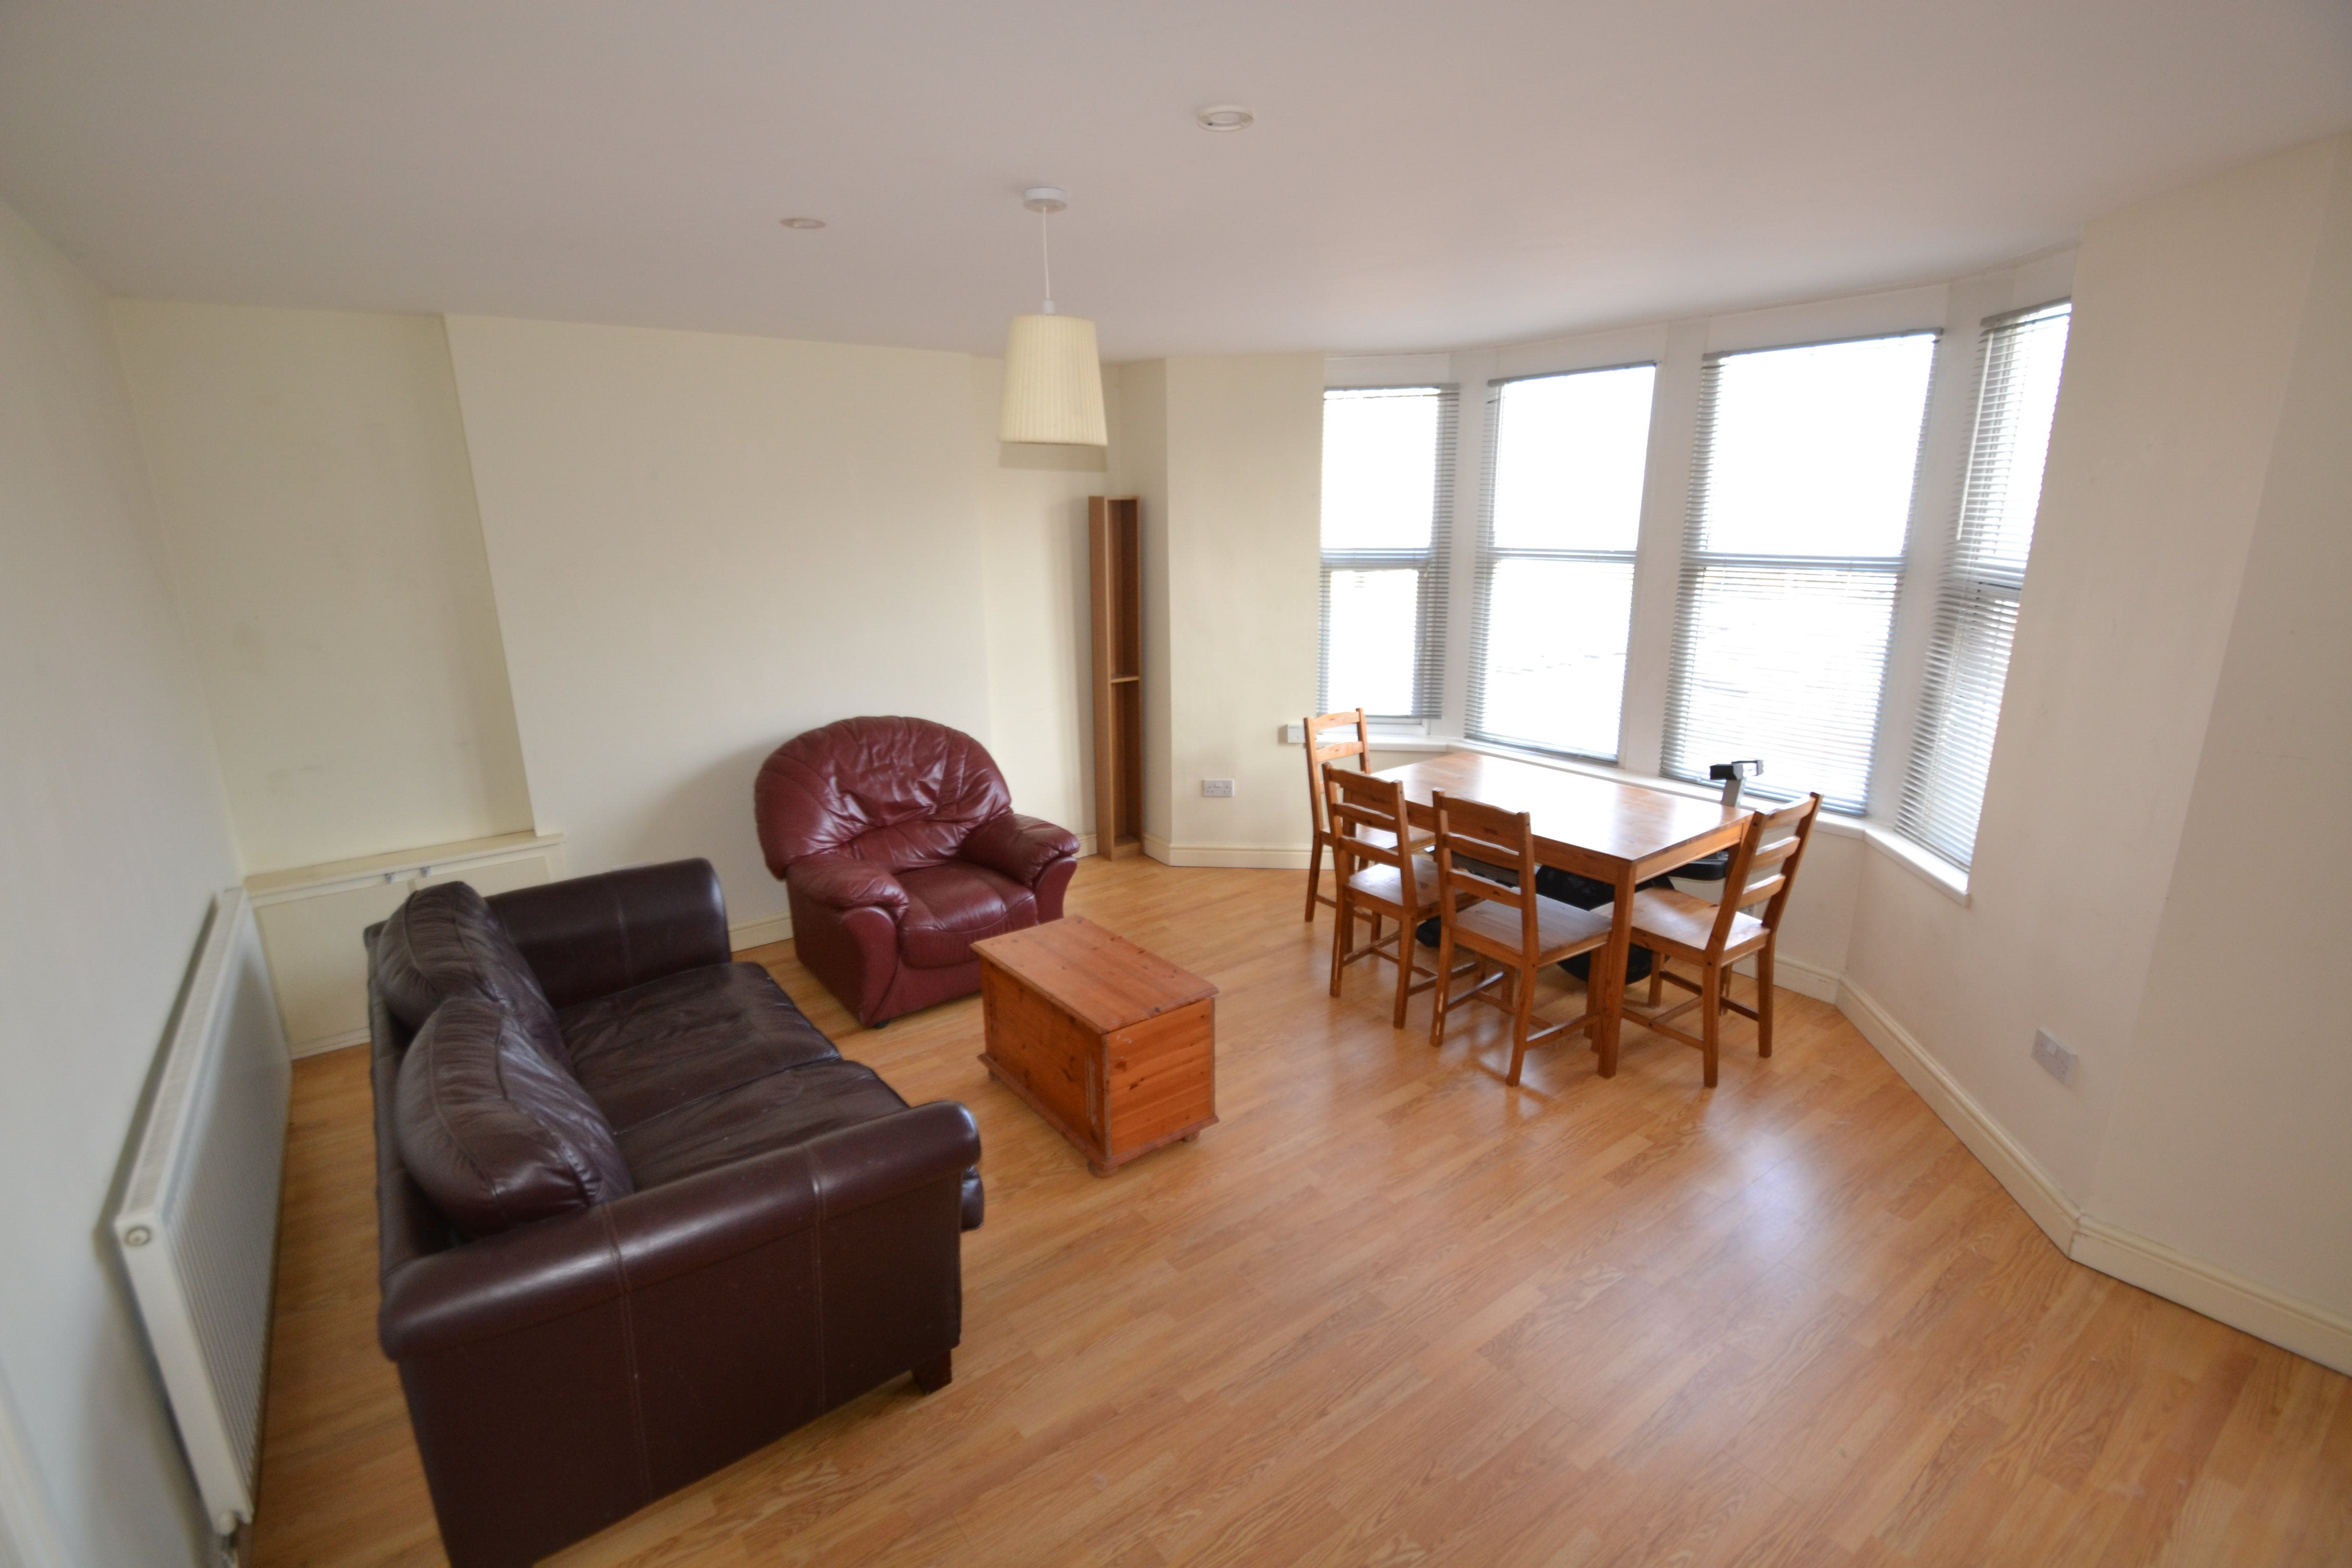 1 bed flat to rent in Marlborough Road, ROATH  - Property Image 1